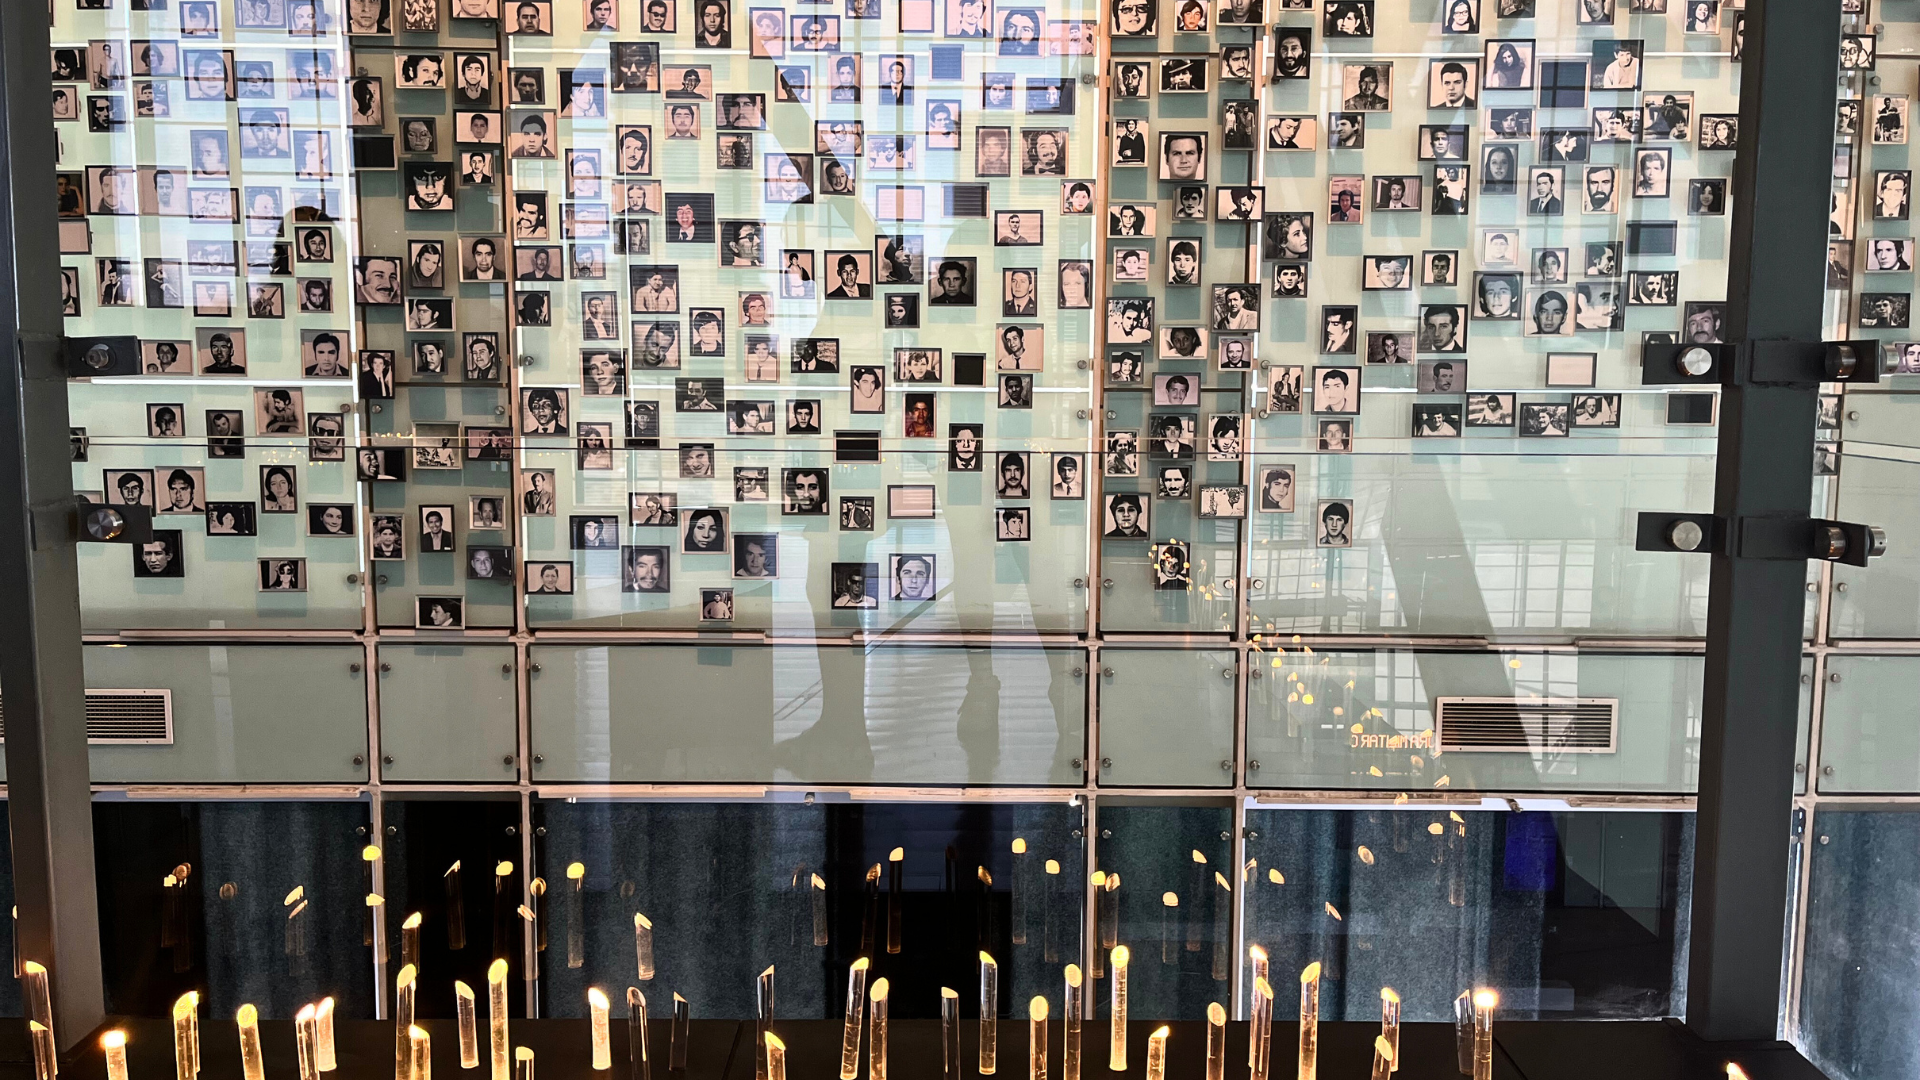 A photo from the Museum of Memory and Human Rights (MMDH) in Santiago, shows multiple photos of people hung on a wall.